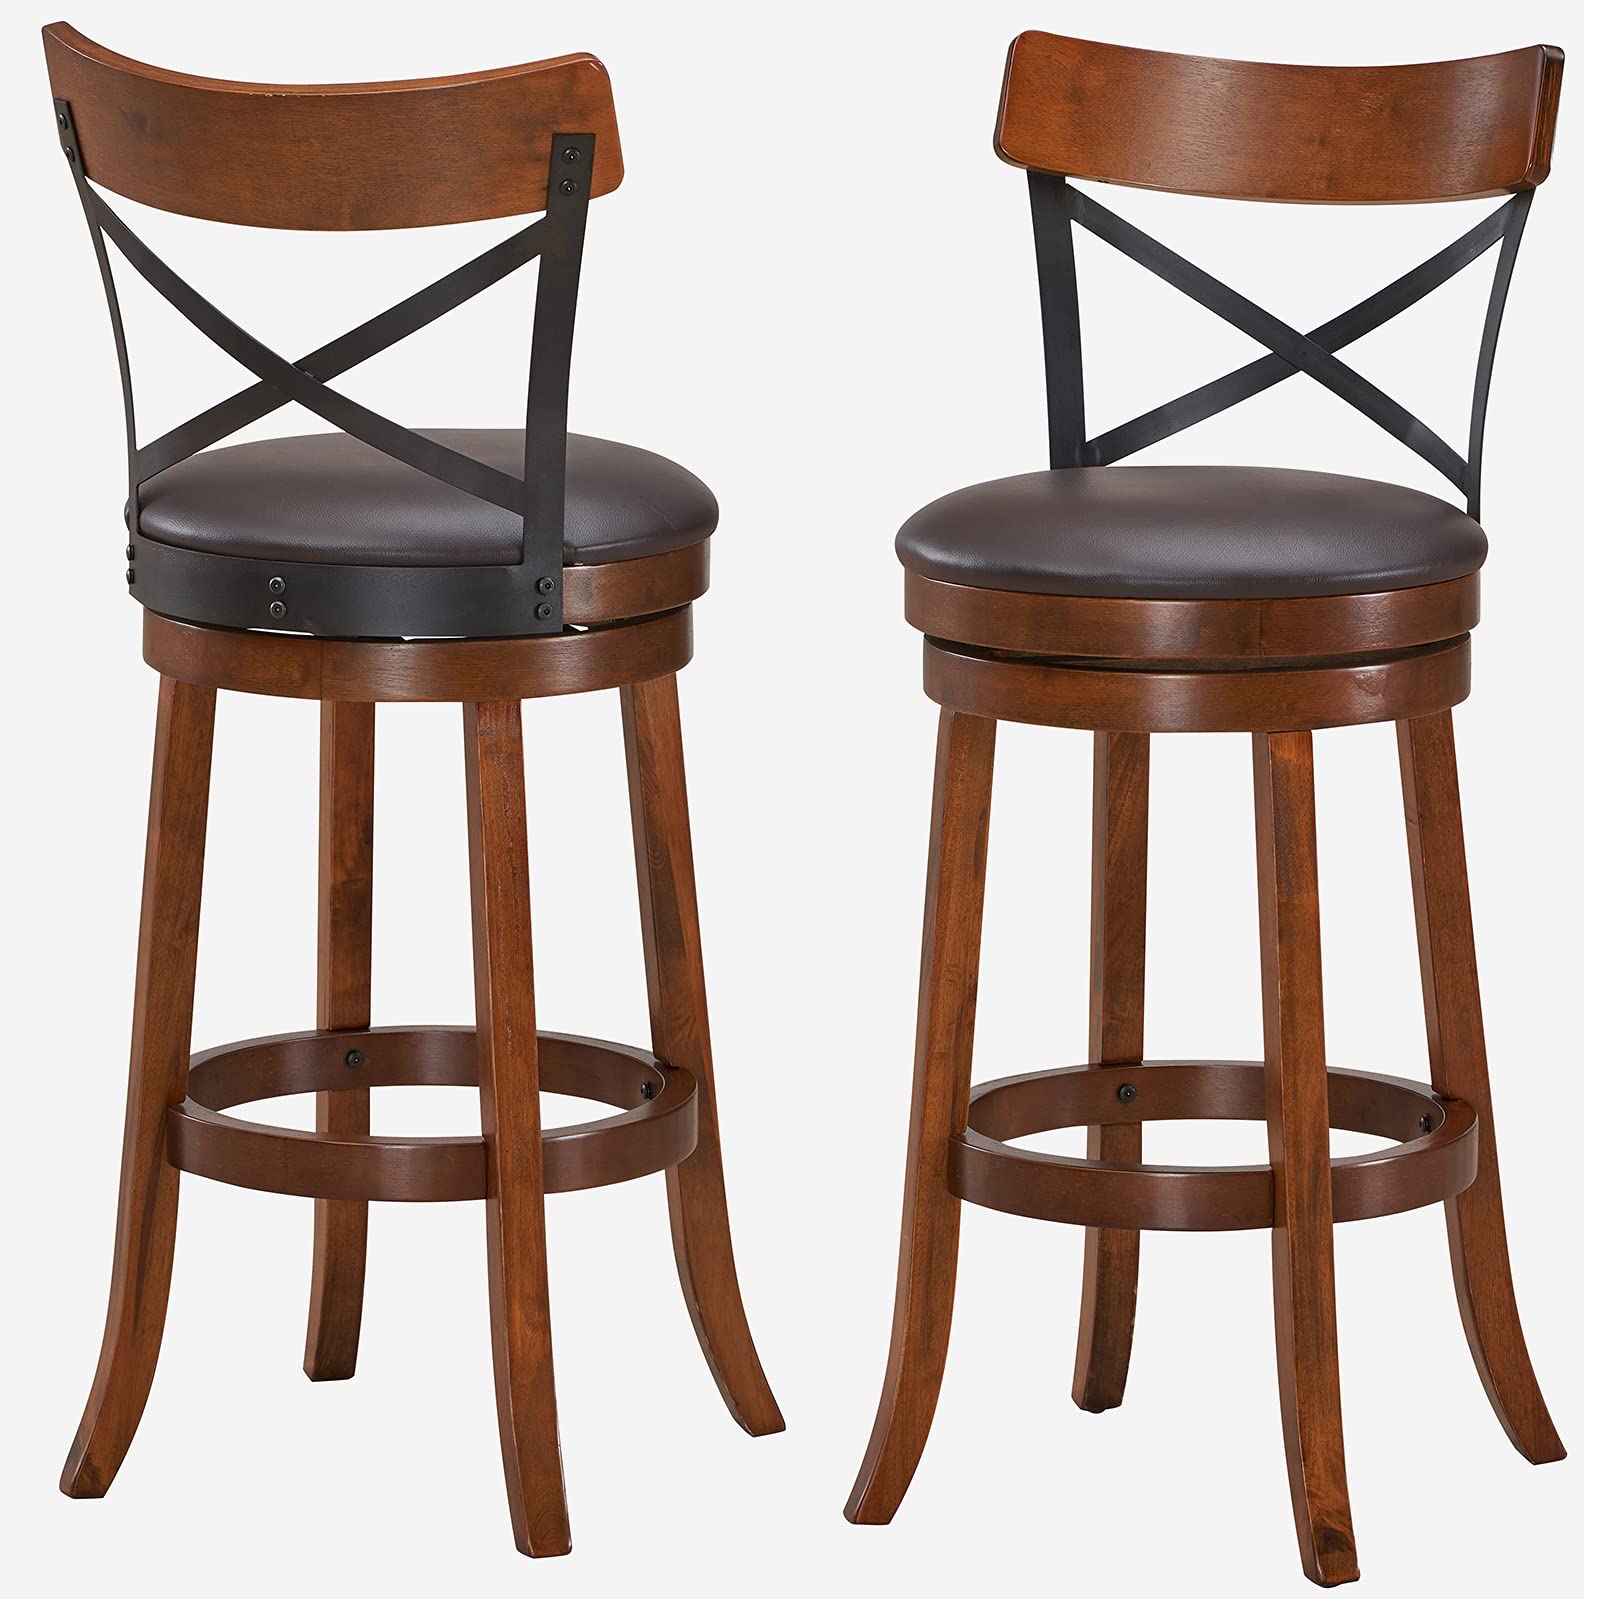 Giantex 25”Height Kitchen Counter Bar Stools for Kitchen Island, Pub, and Restaurant